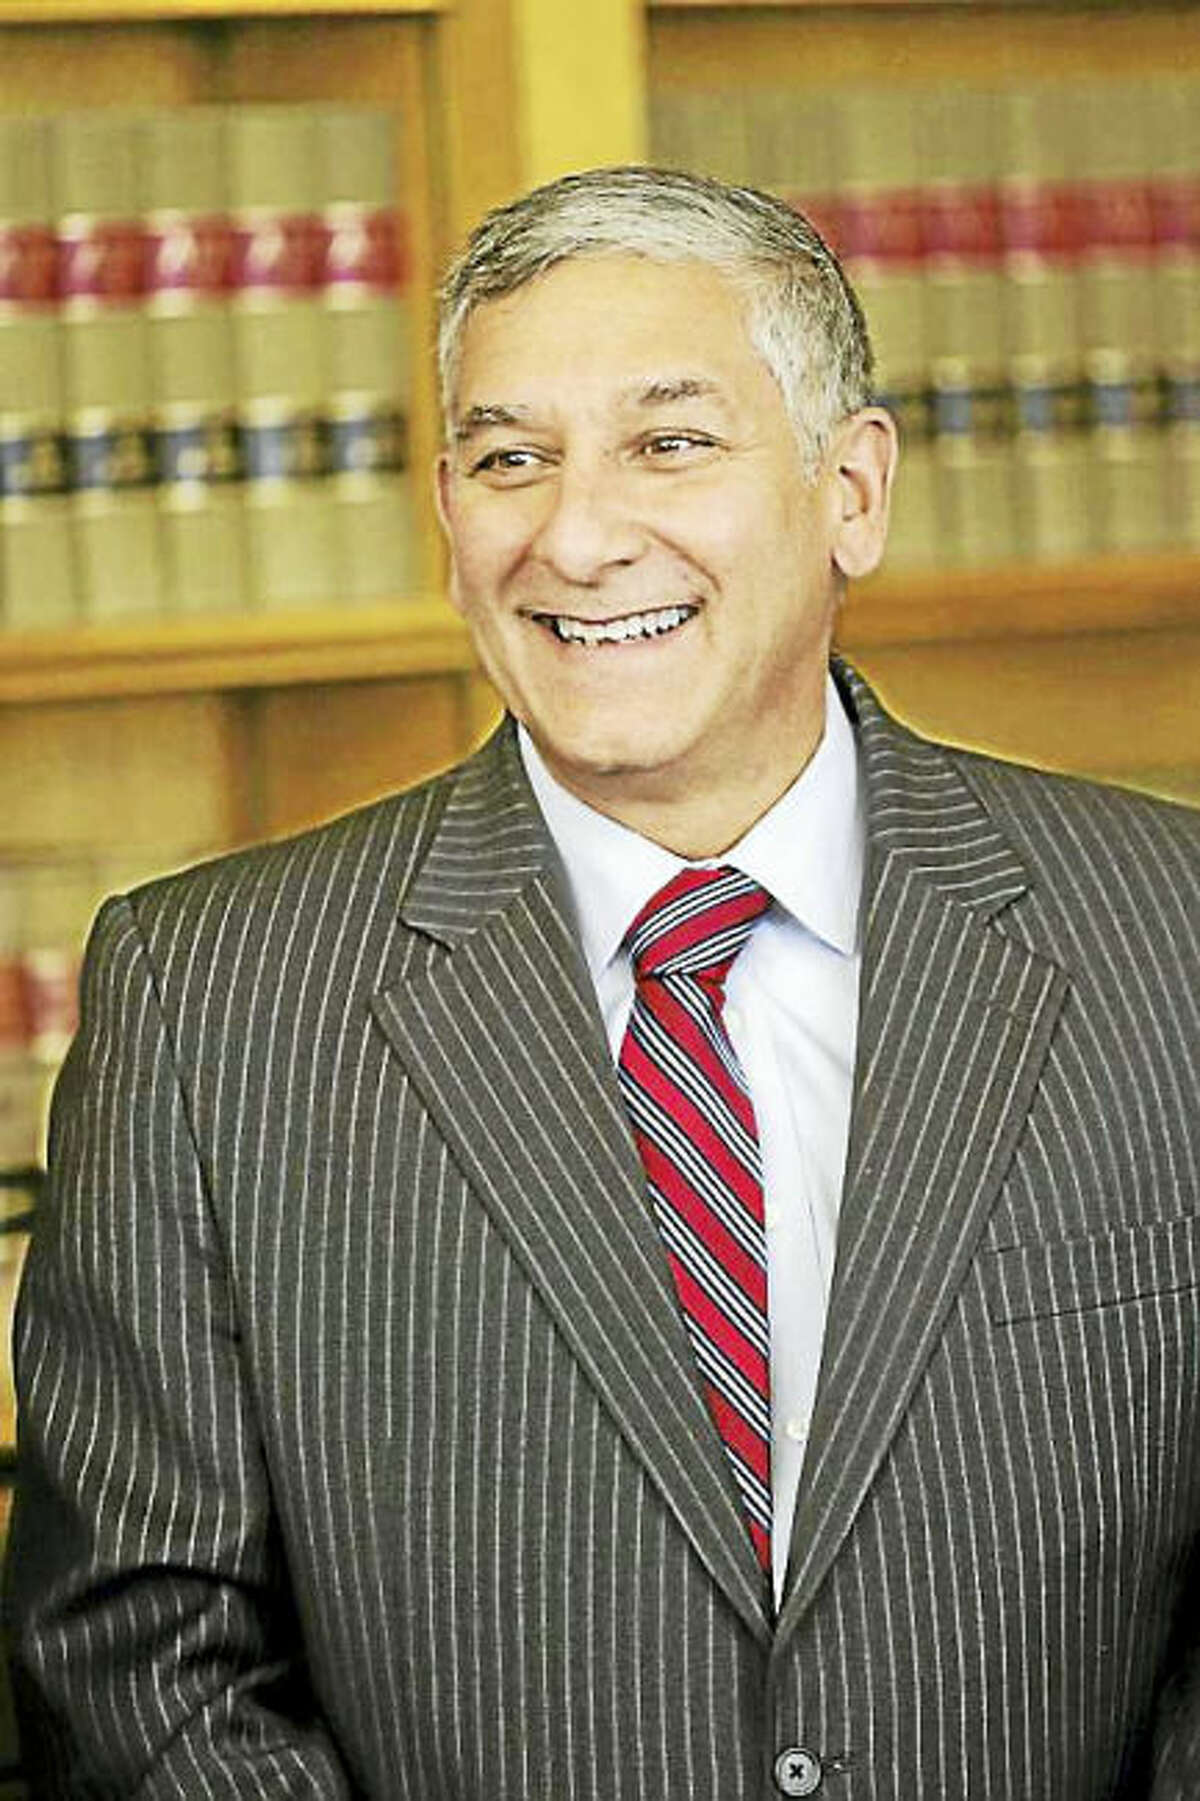 New Haven Register/Hearst Connecticut Media.  State Senate President Pro Tempore Len Fasano, R-North Haven, represents the 34th Senatorial District including East Haven, Durham, North Haven and Wallingford.